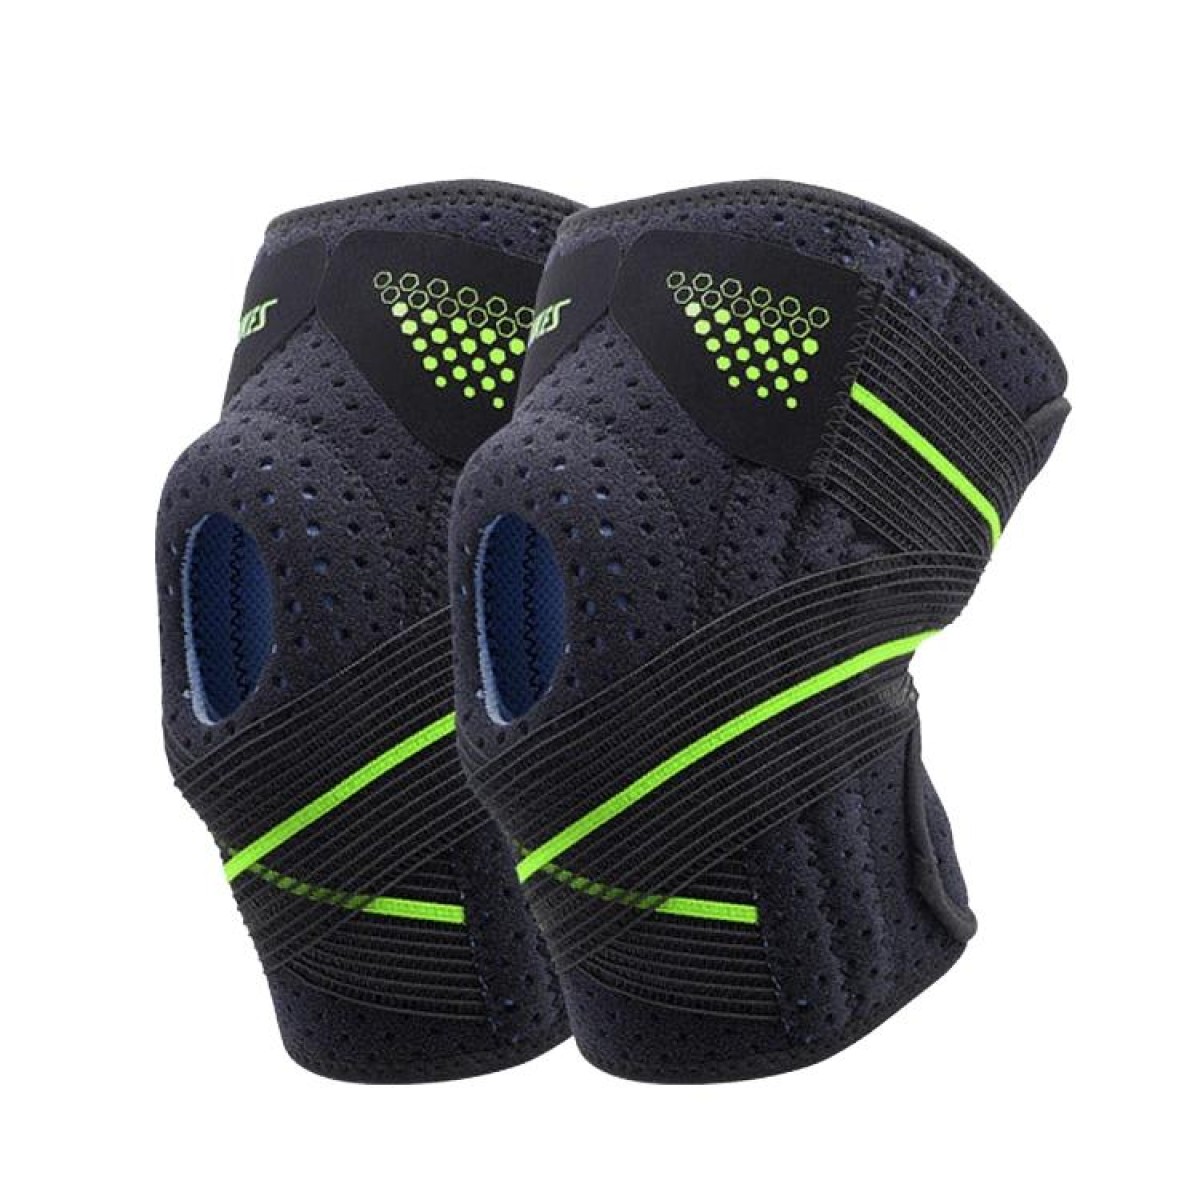 AOLIKES HX-7909 Tie Spring Support Silicone Knee Pad Mountaineering Riding Running Basketball Sweat-Absorbent Breathable Knee Pad(Black Green)